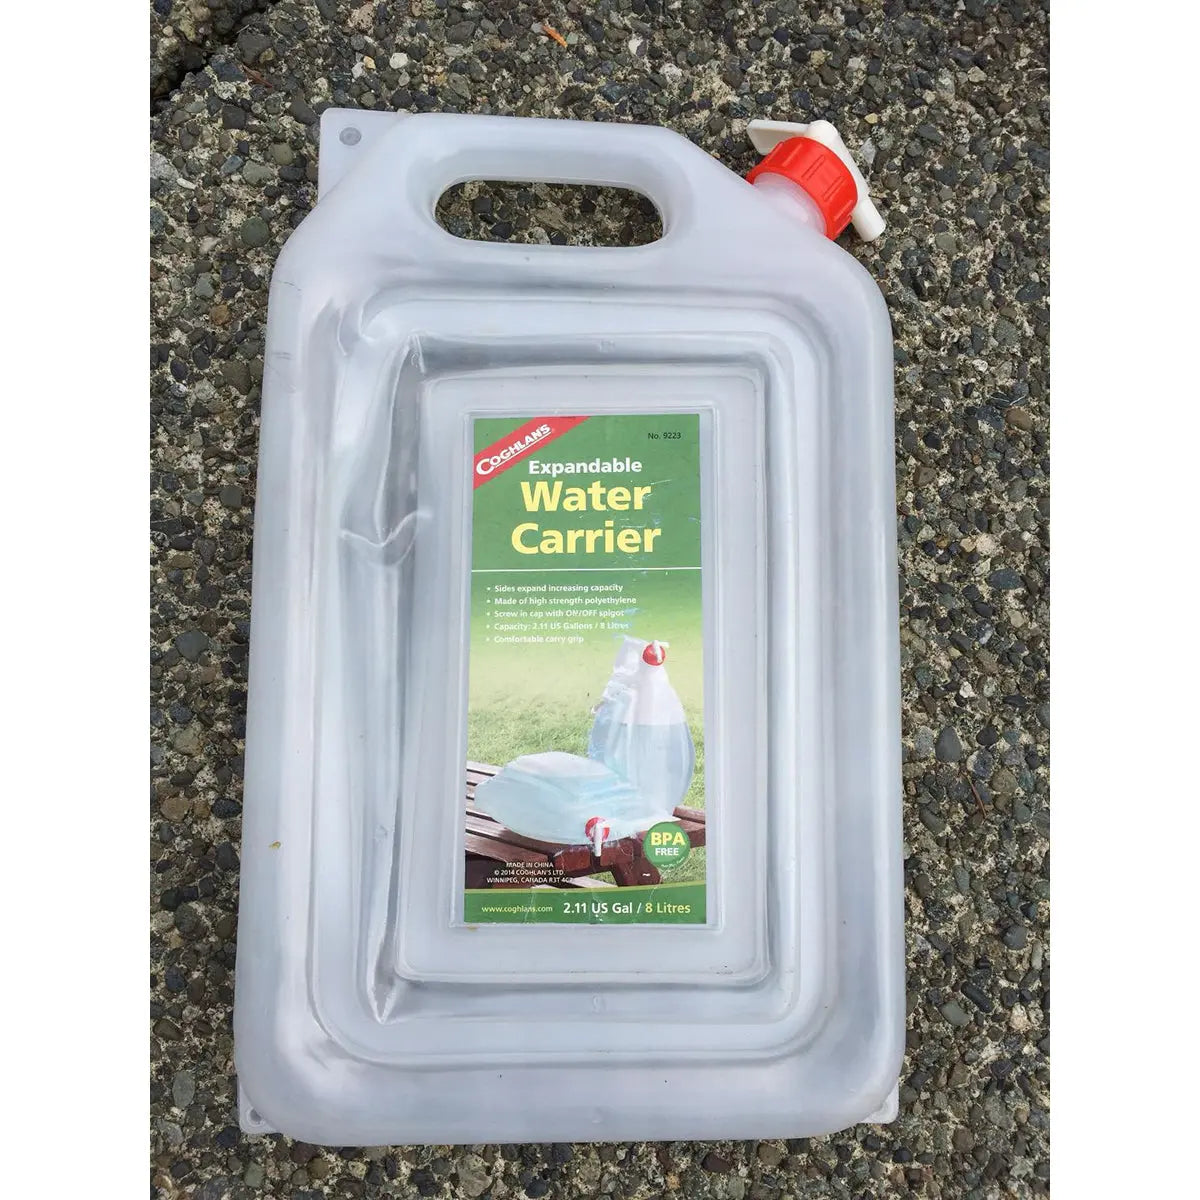 Coghlan's Expandable Water Carrier, 2-Gallon Camping Jug, Collapses for Storage Coghlan's